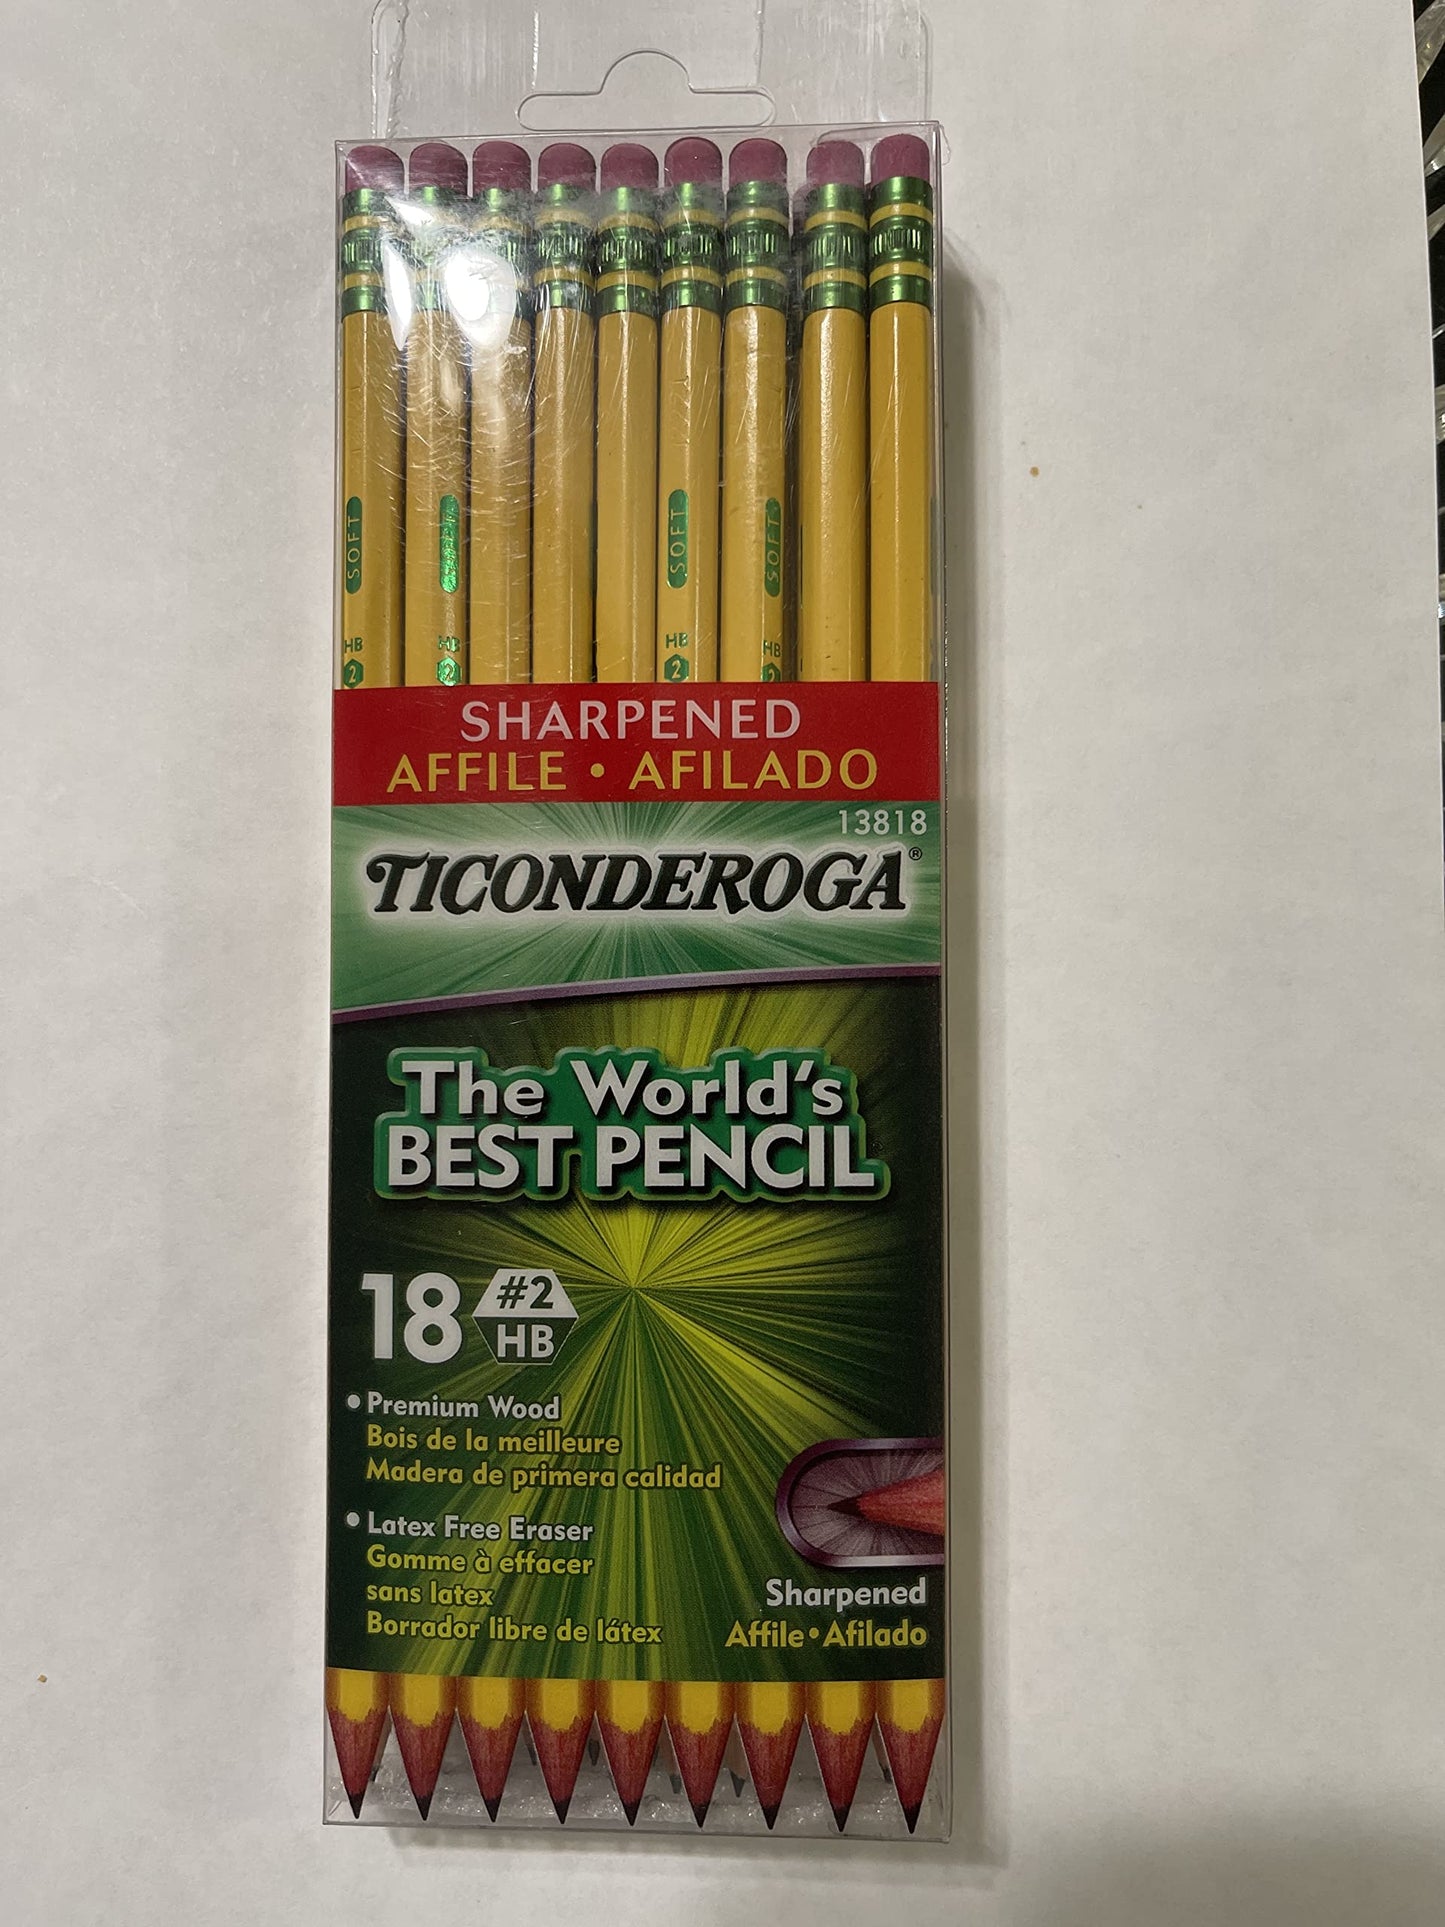 Ticonderoga 13818 #2 Sharpened The World's Best Pencil™ 18 Count